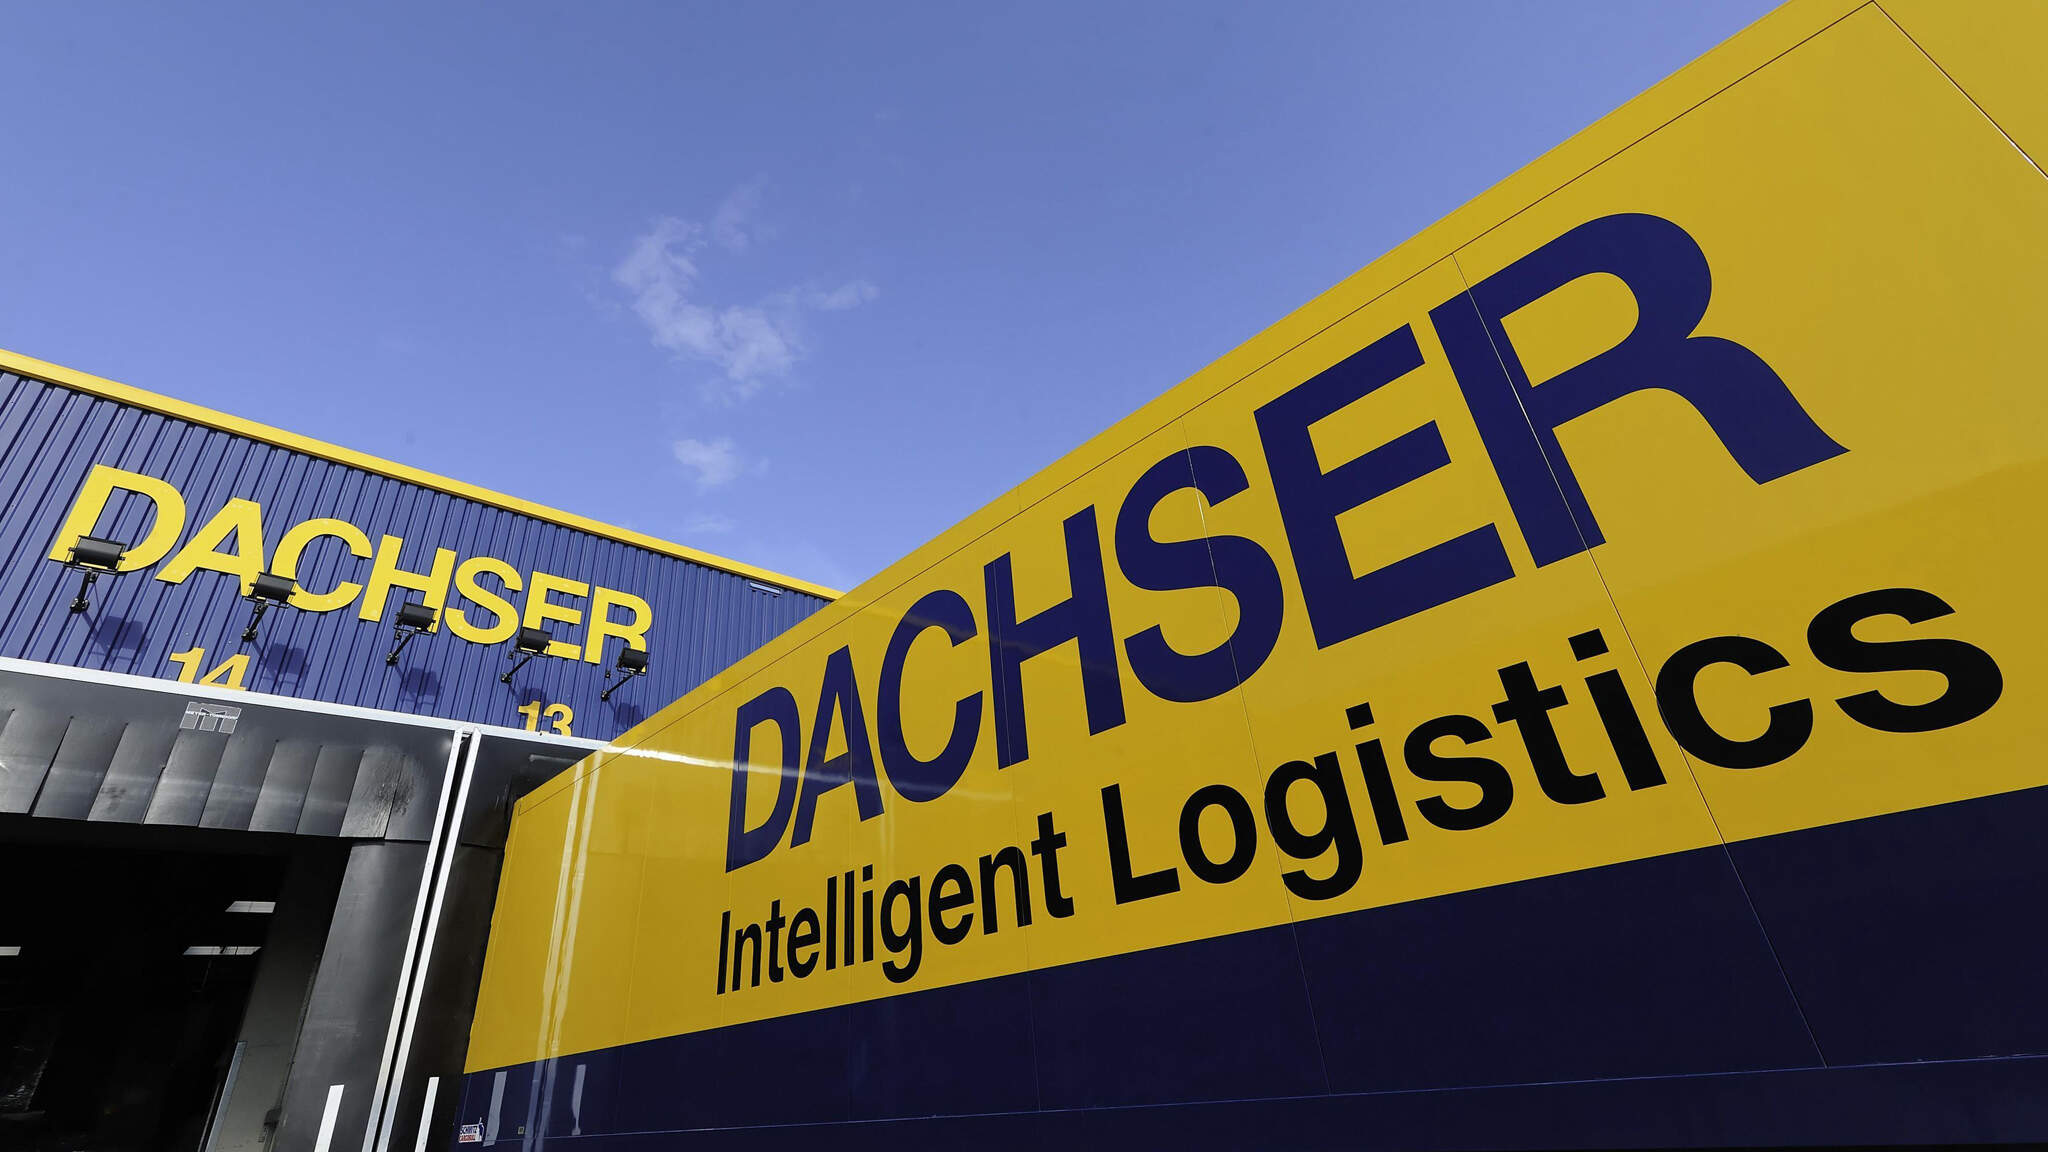 DACHSER is thyssenkrupp Elevadores partner for logistics operations in Brazil and other countries around the world